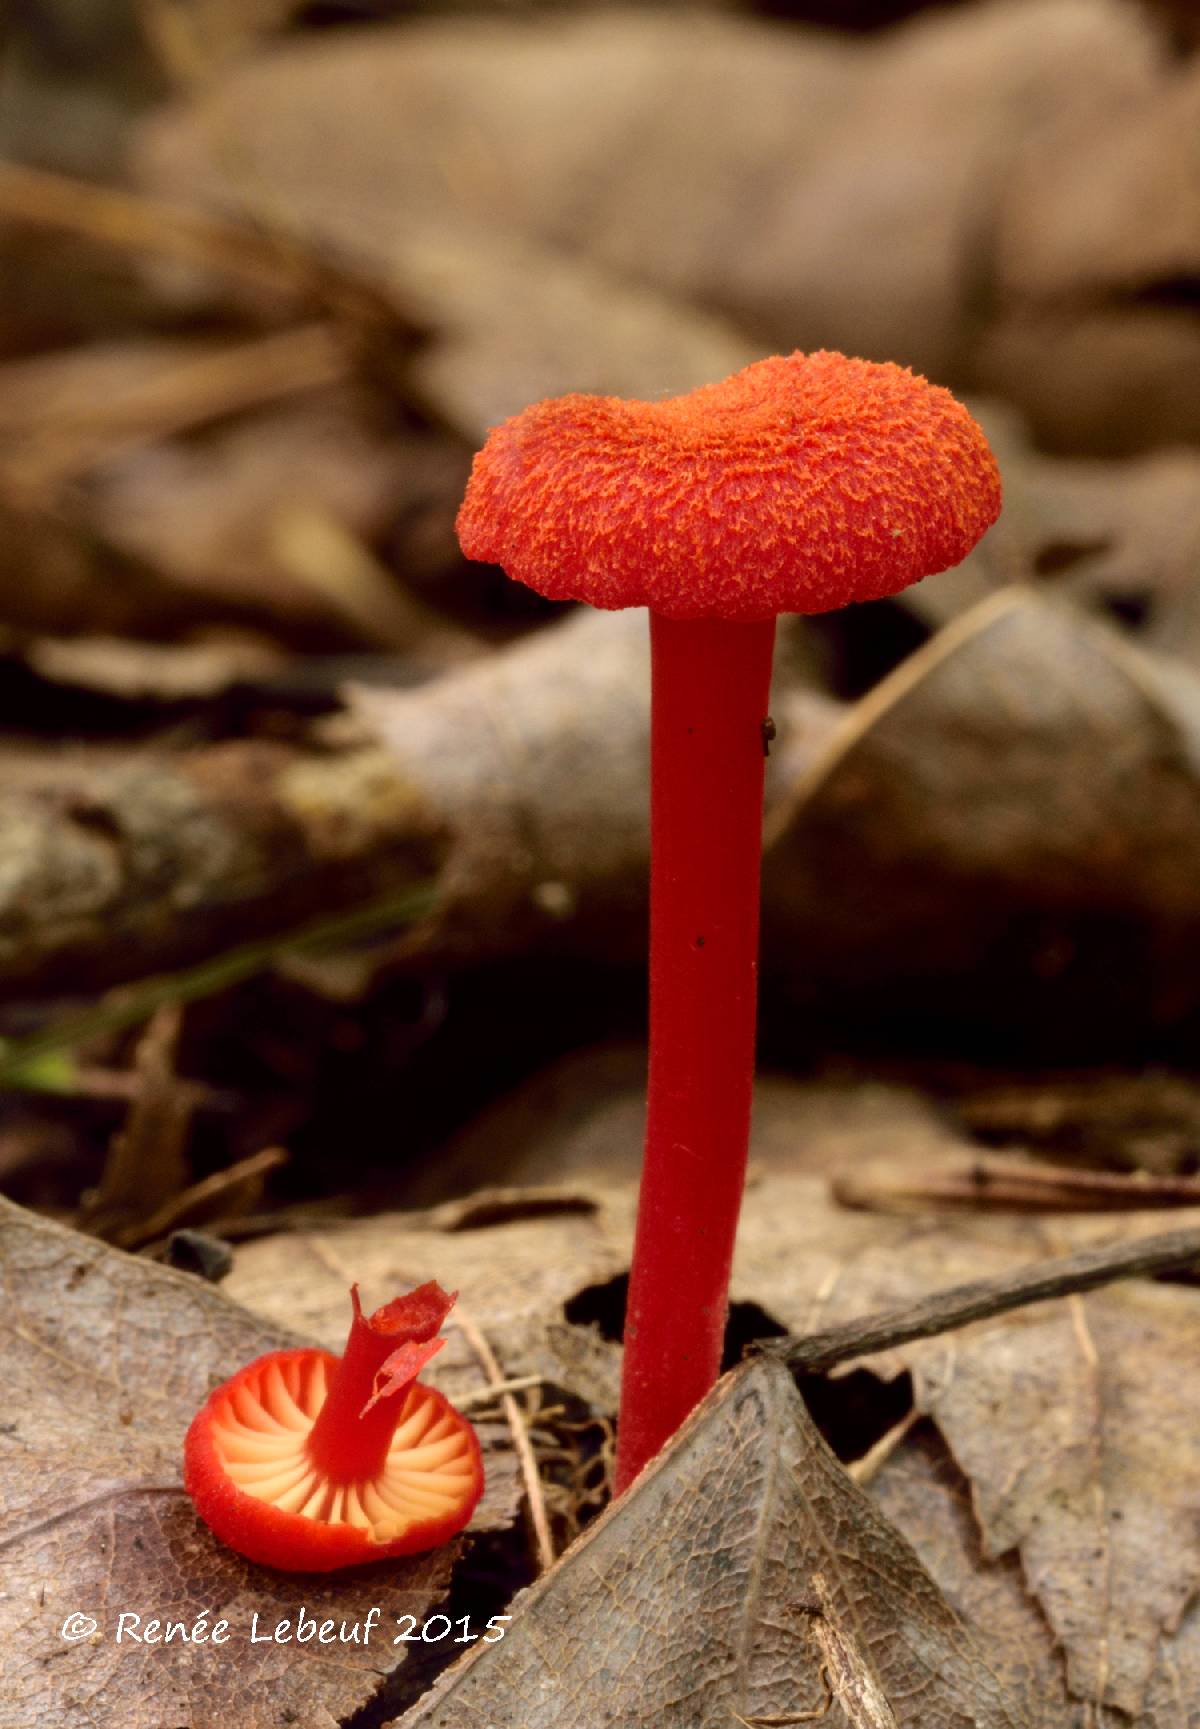 Hygrocybe cantharellus f. cantharellus image